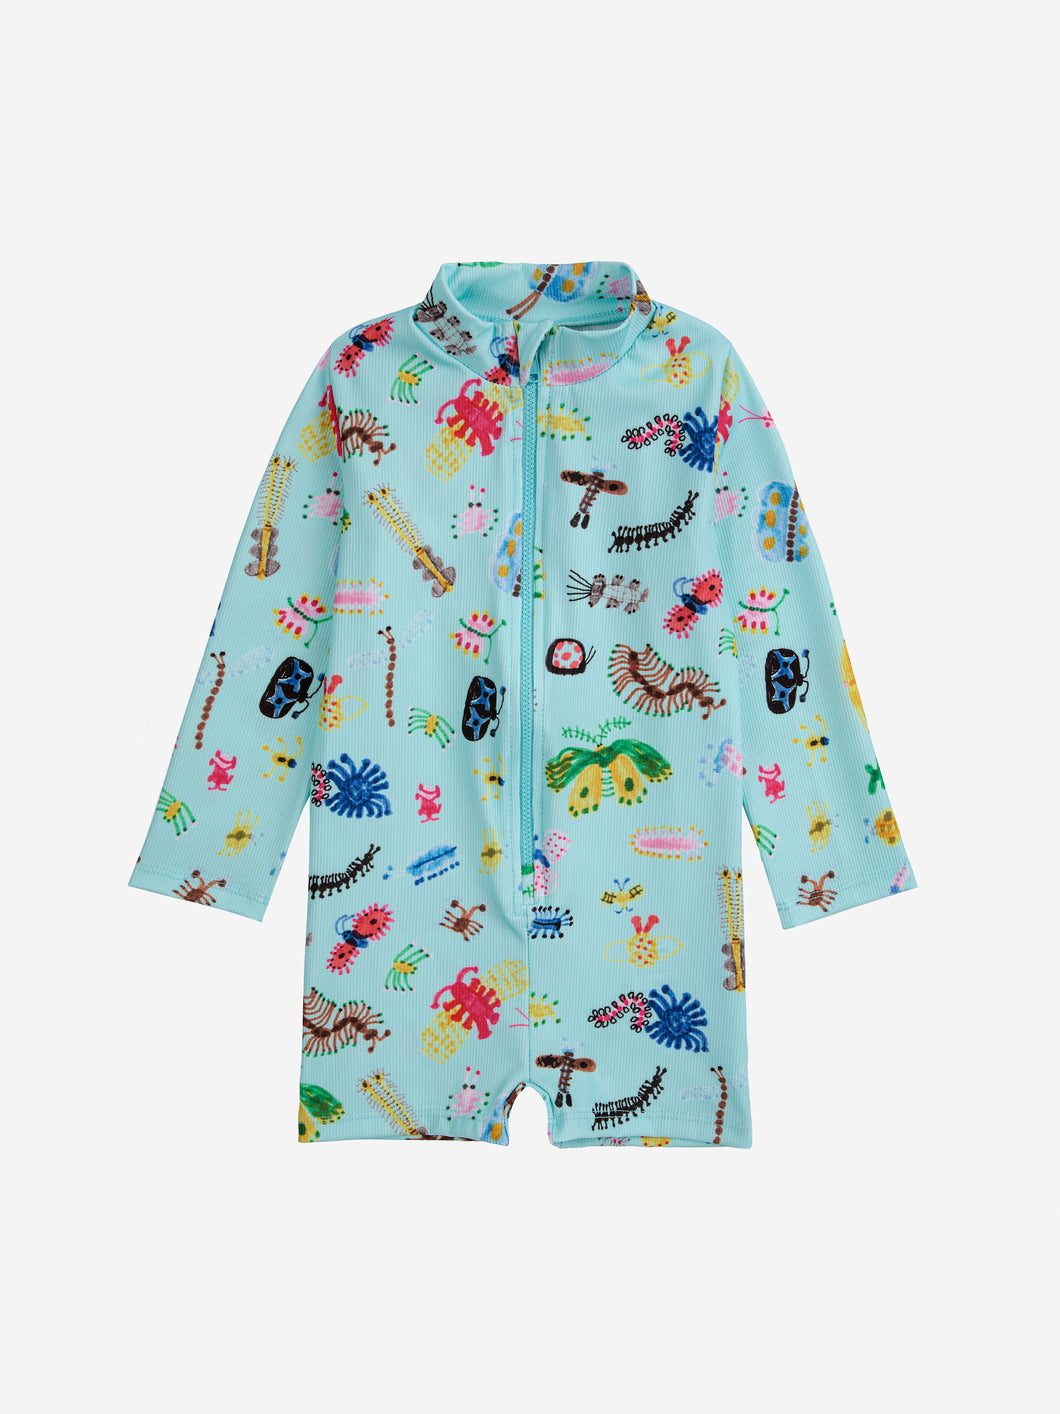 Bobo Choses Baby Funny Insects All Over Swim Overall Aqua Blue